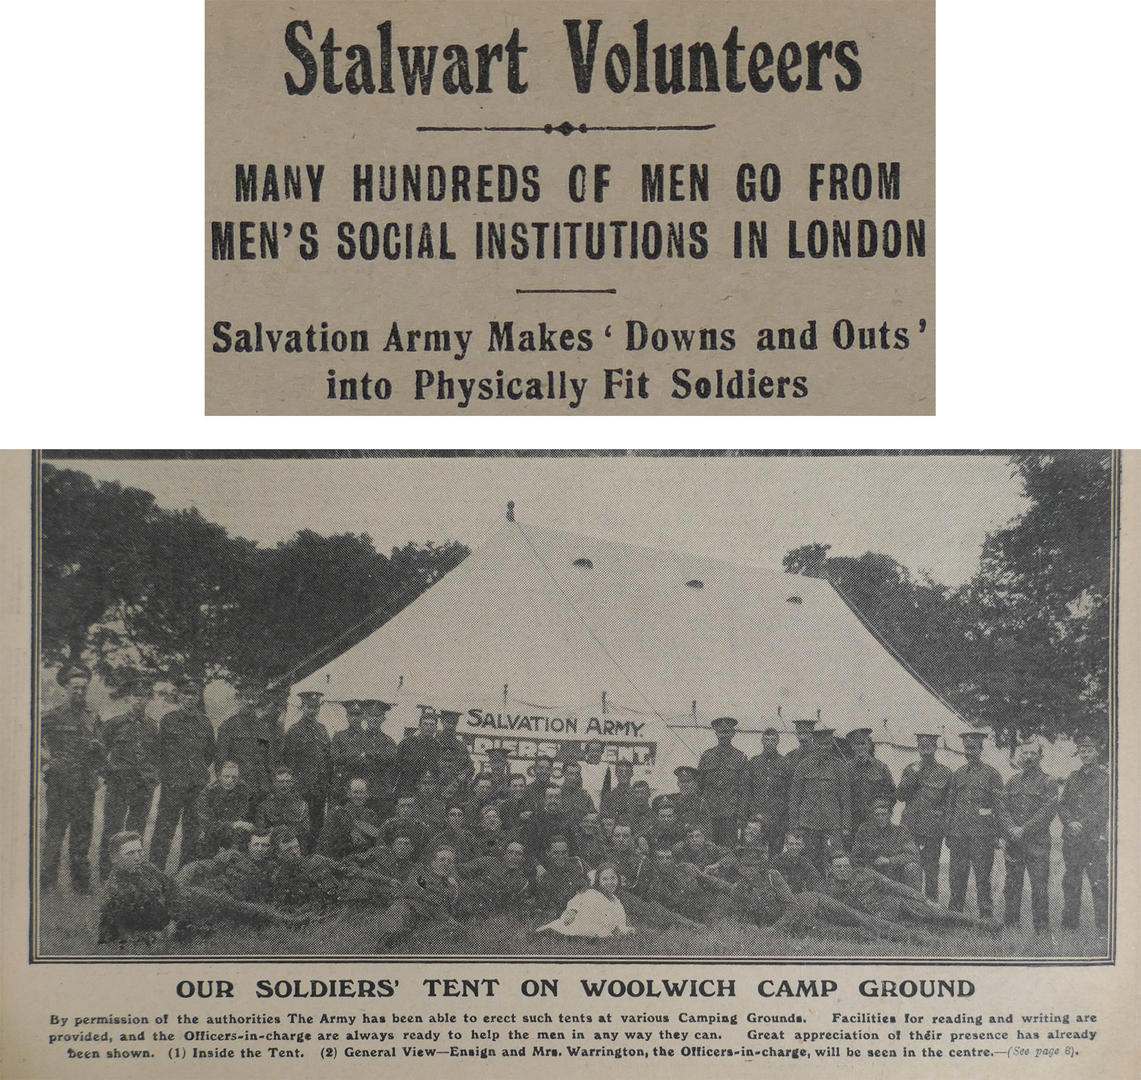 Two articles describing Salvation Army activities during the First World War